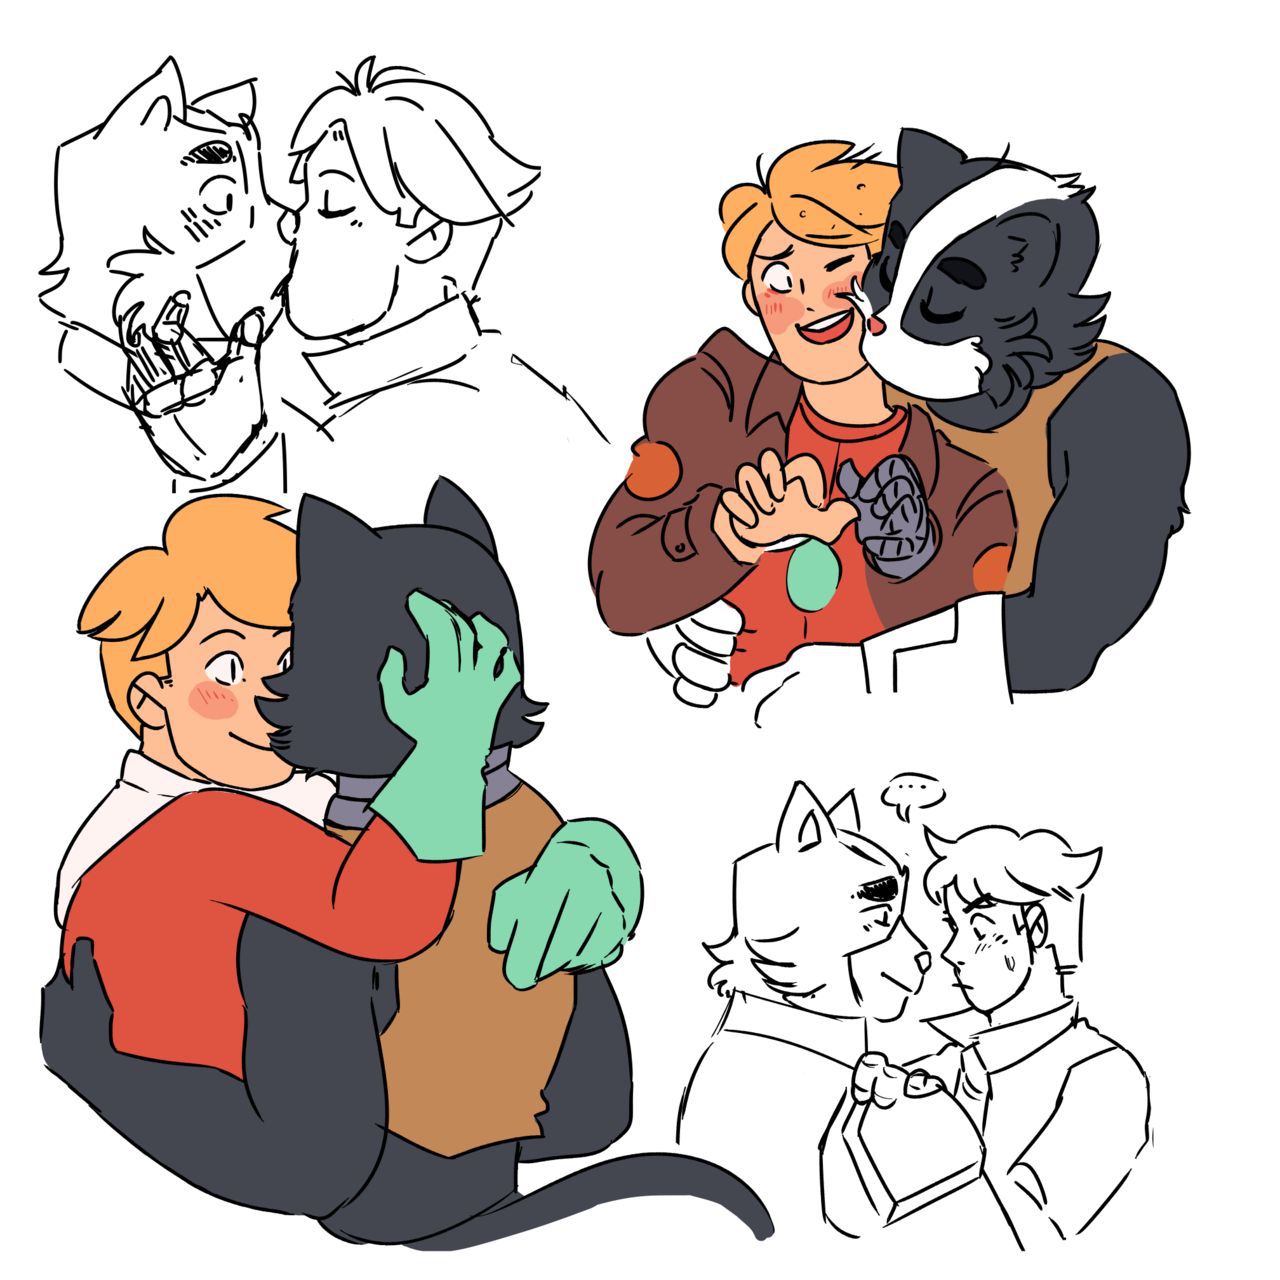 Final Space gay pic (various artists) 39